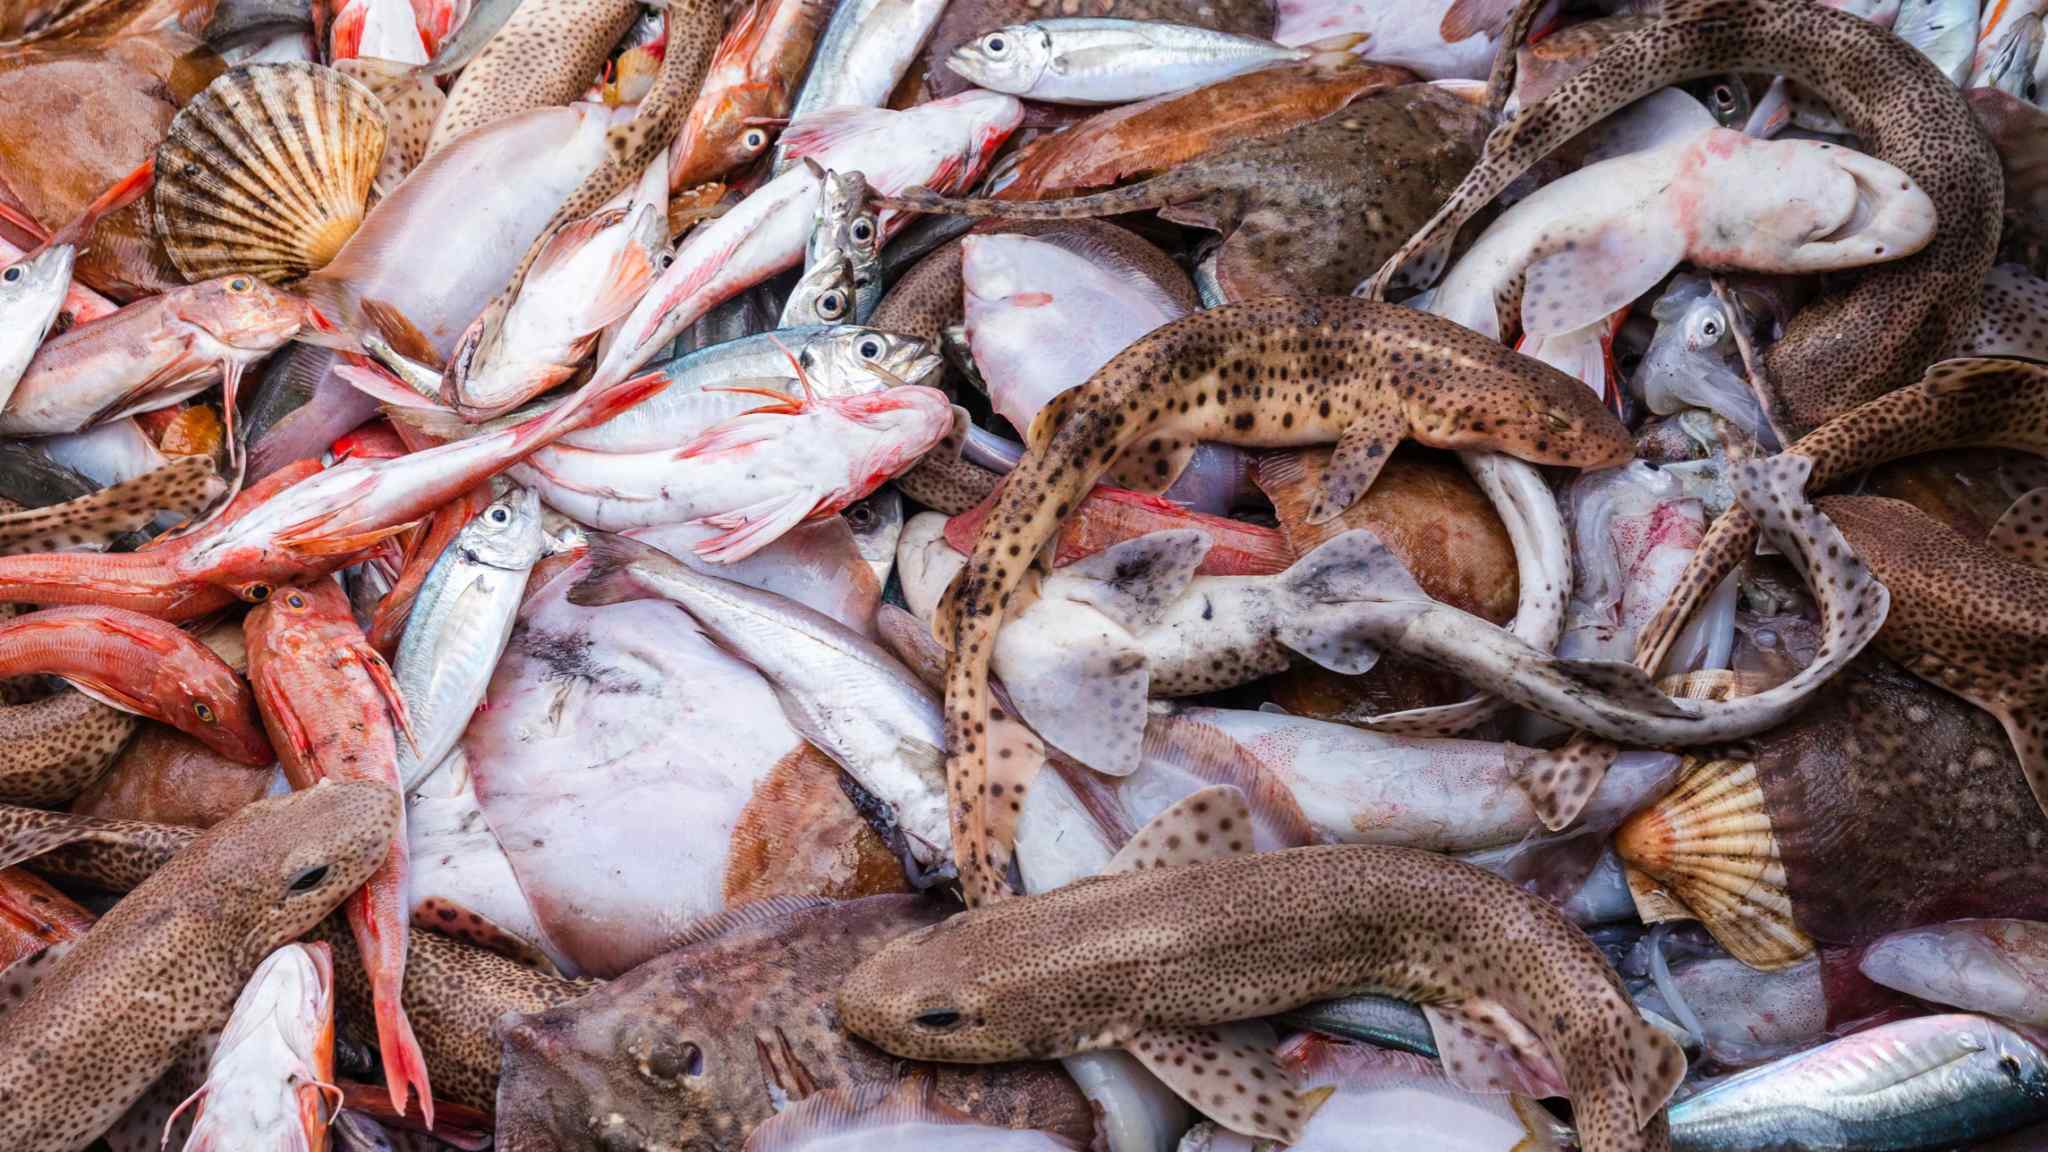 New tool aims to hook illegal fishing by raising alarm for insurers